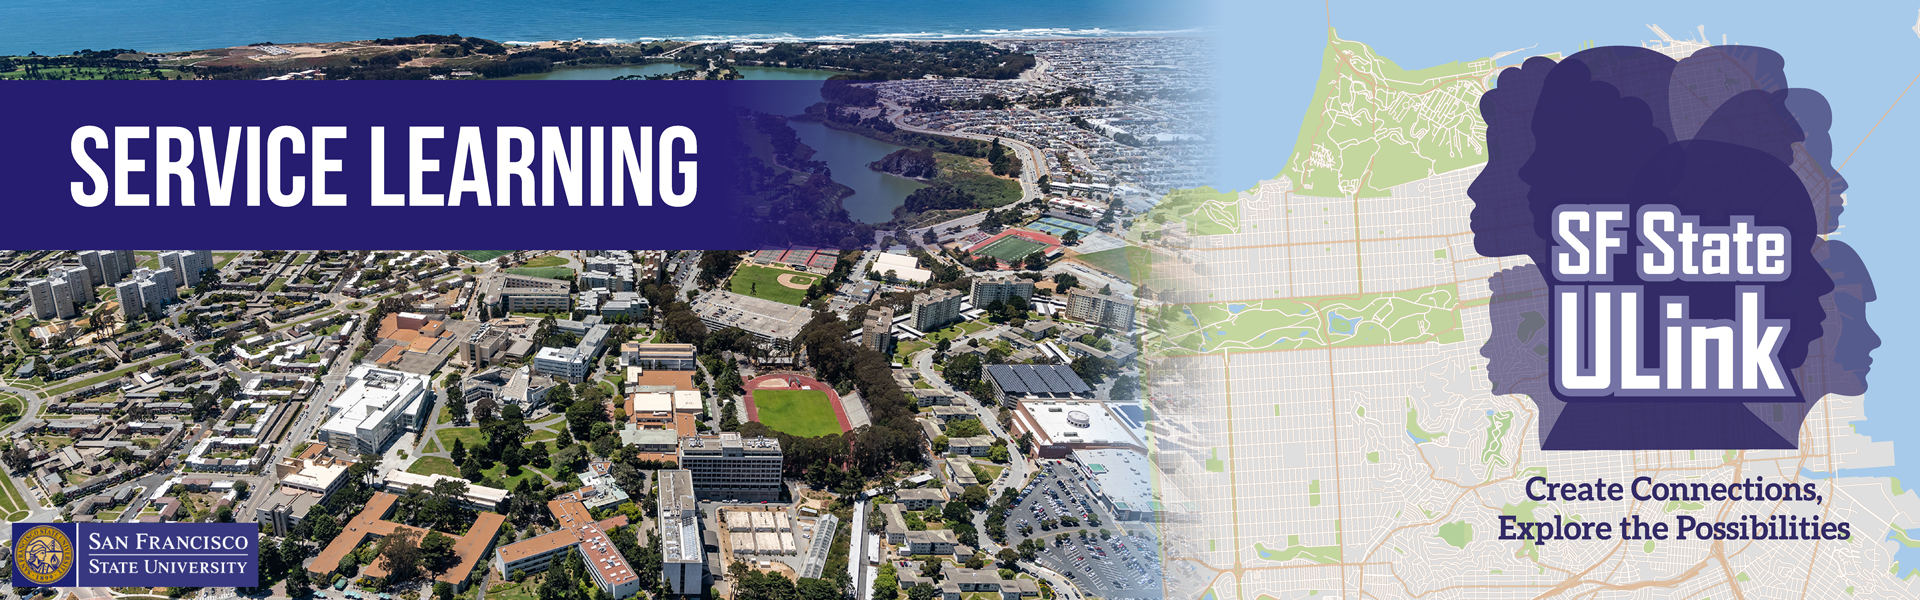 SF State campus with ULink logo with a headline text saying "Service Learning"